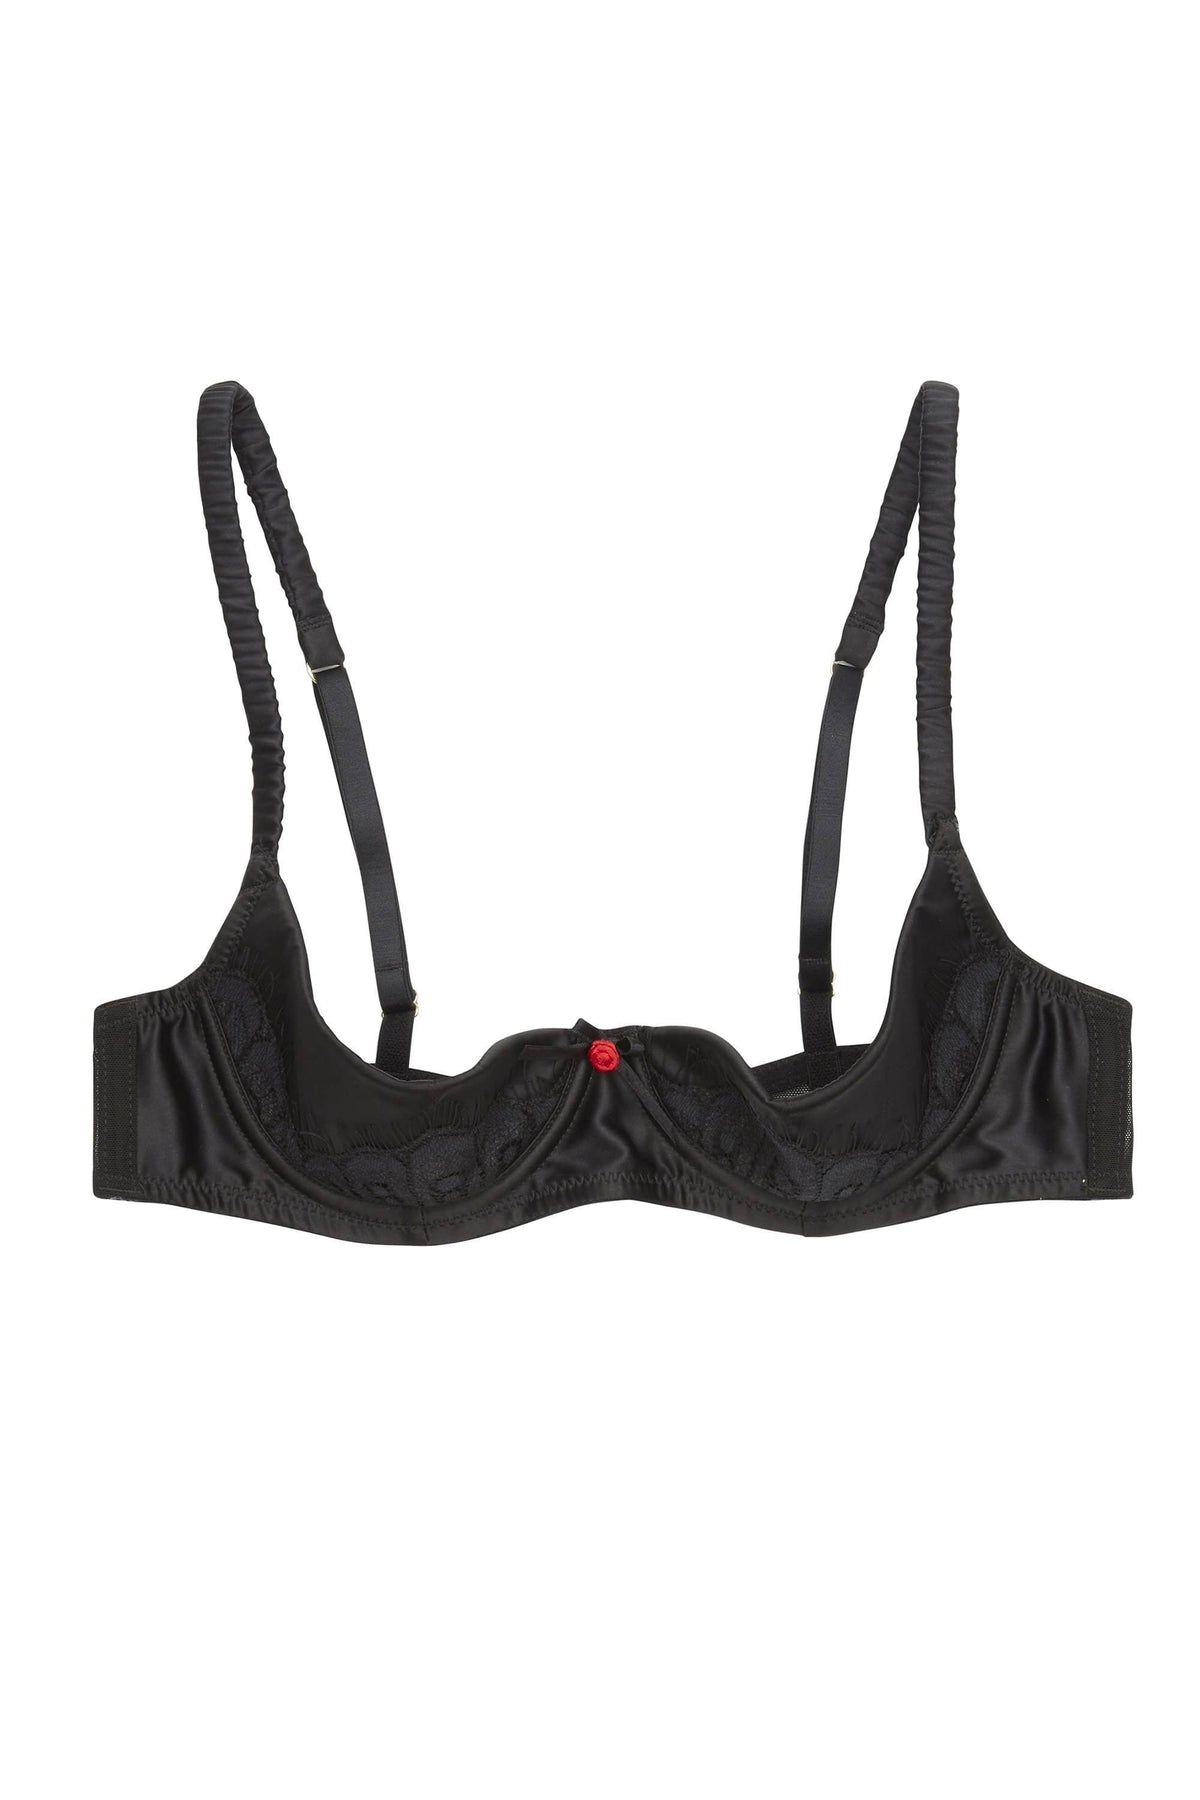 Marlene Black 1/4 Cup bra with Lace DD - G Cups – Playful Promises Australia